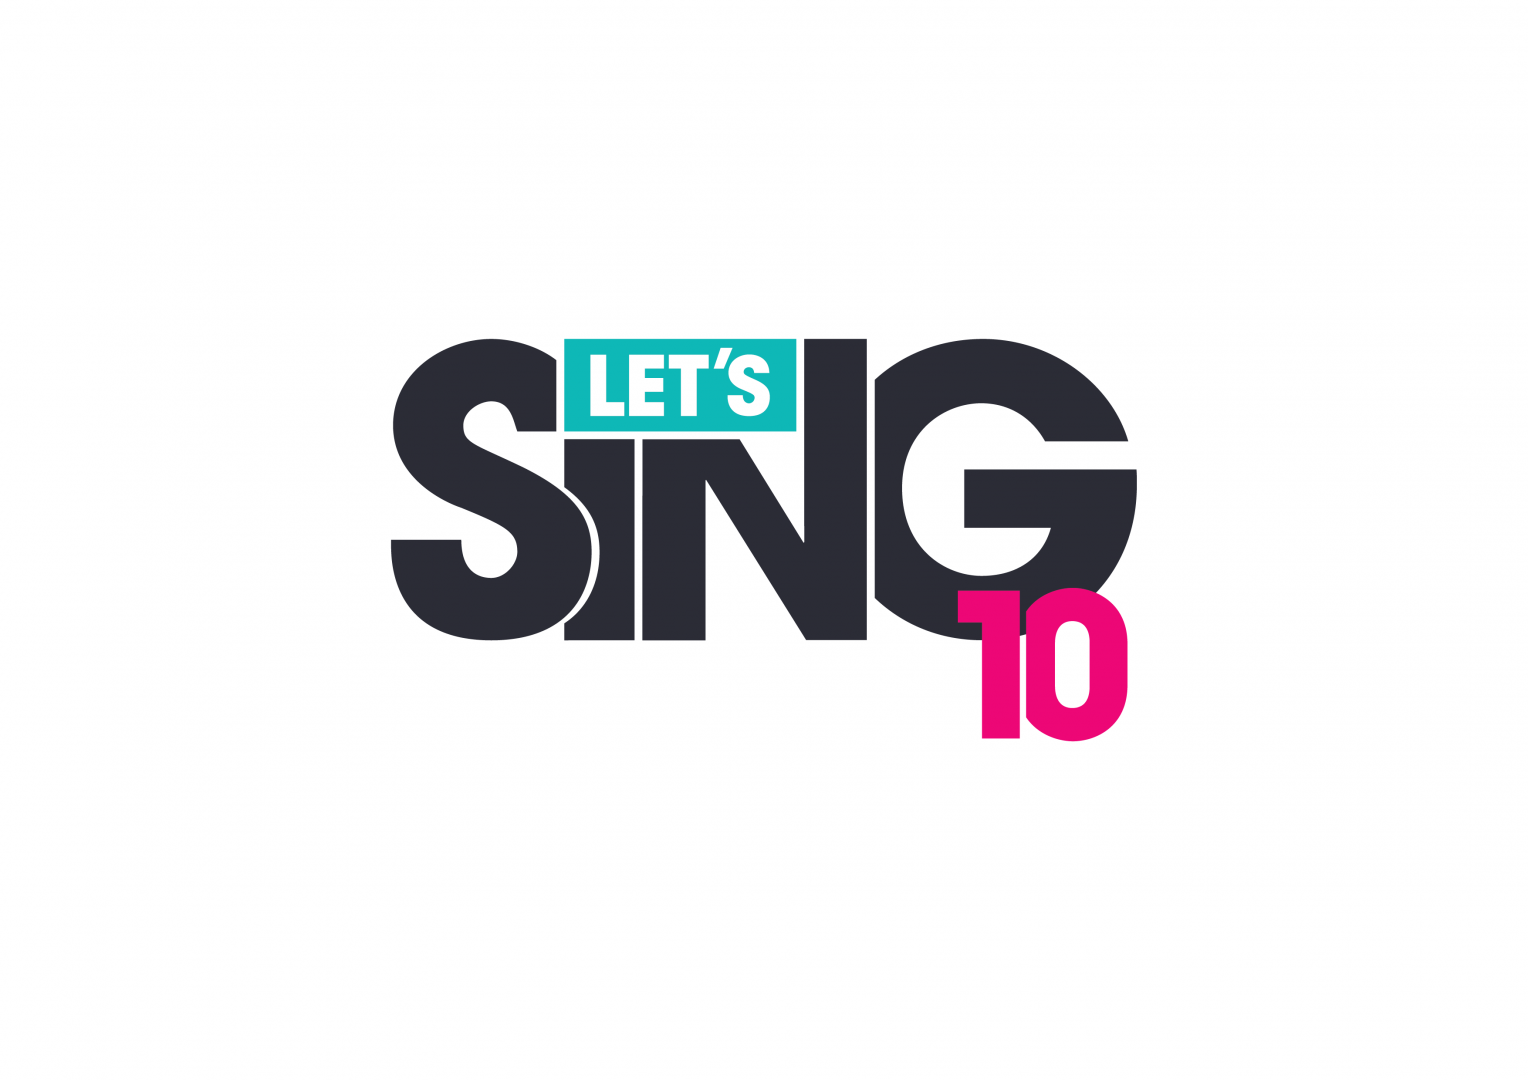 Let's go!. Sing x.